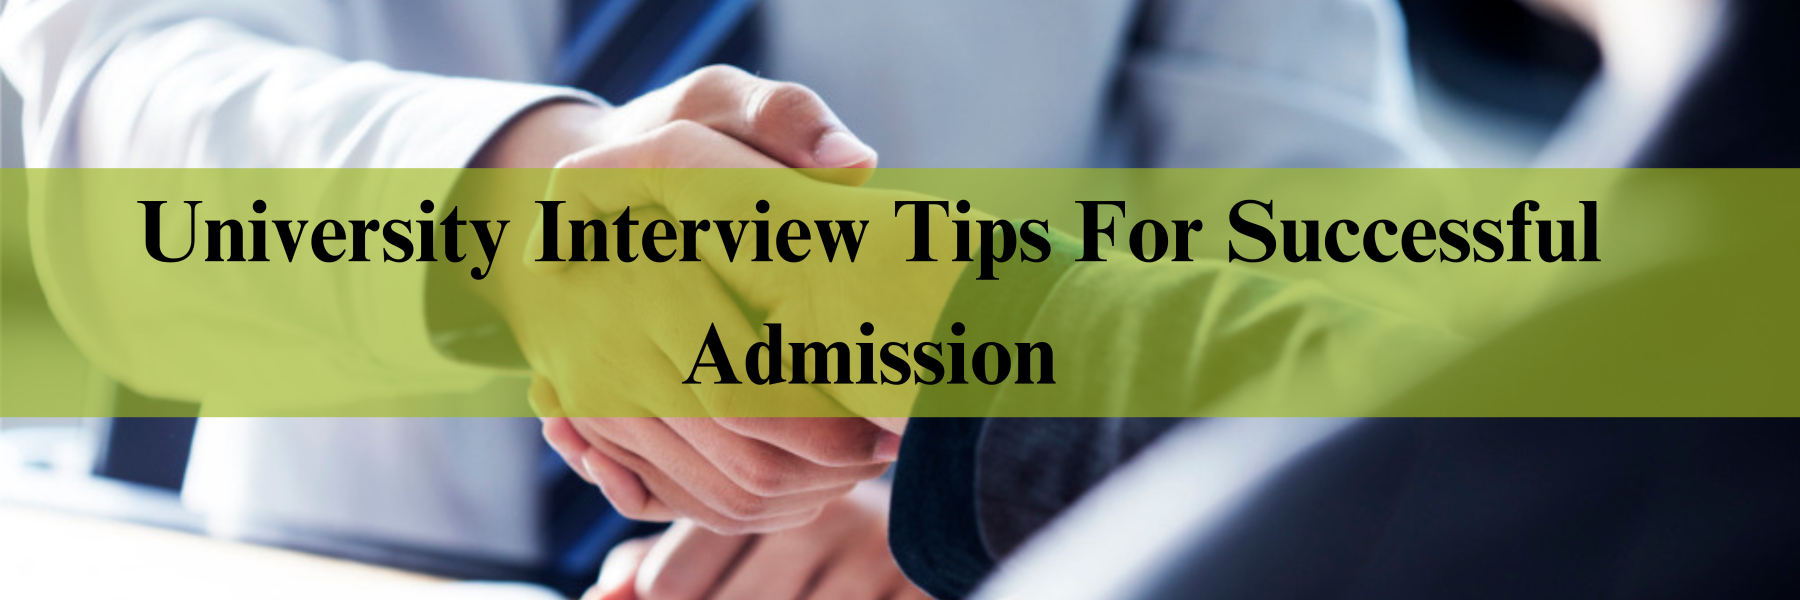 University Admission interview tips